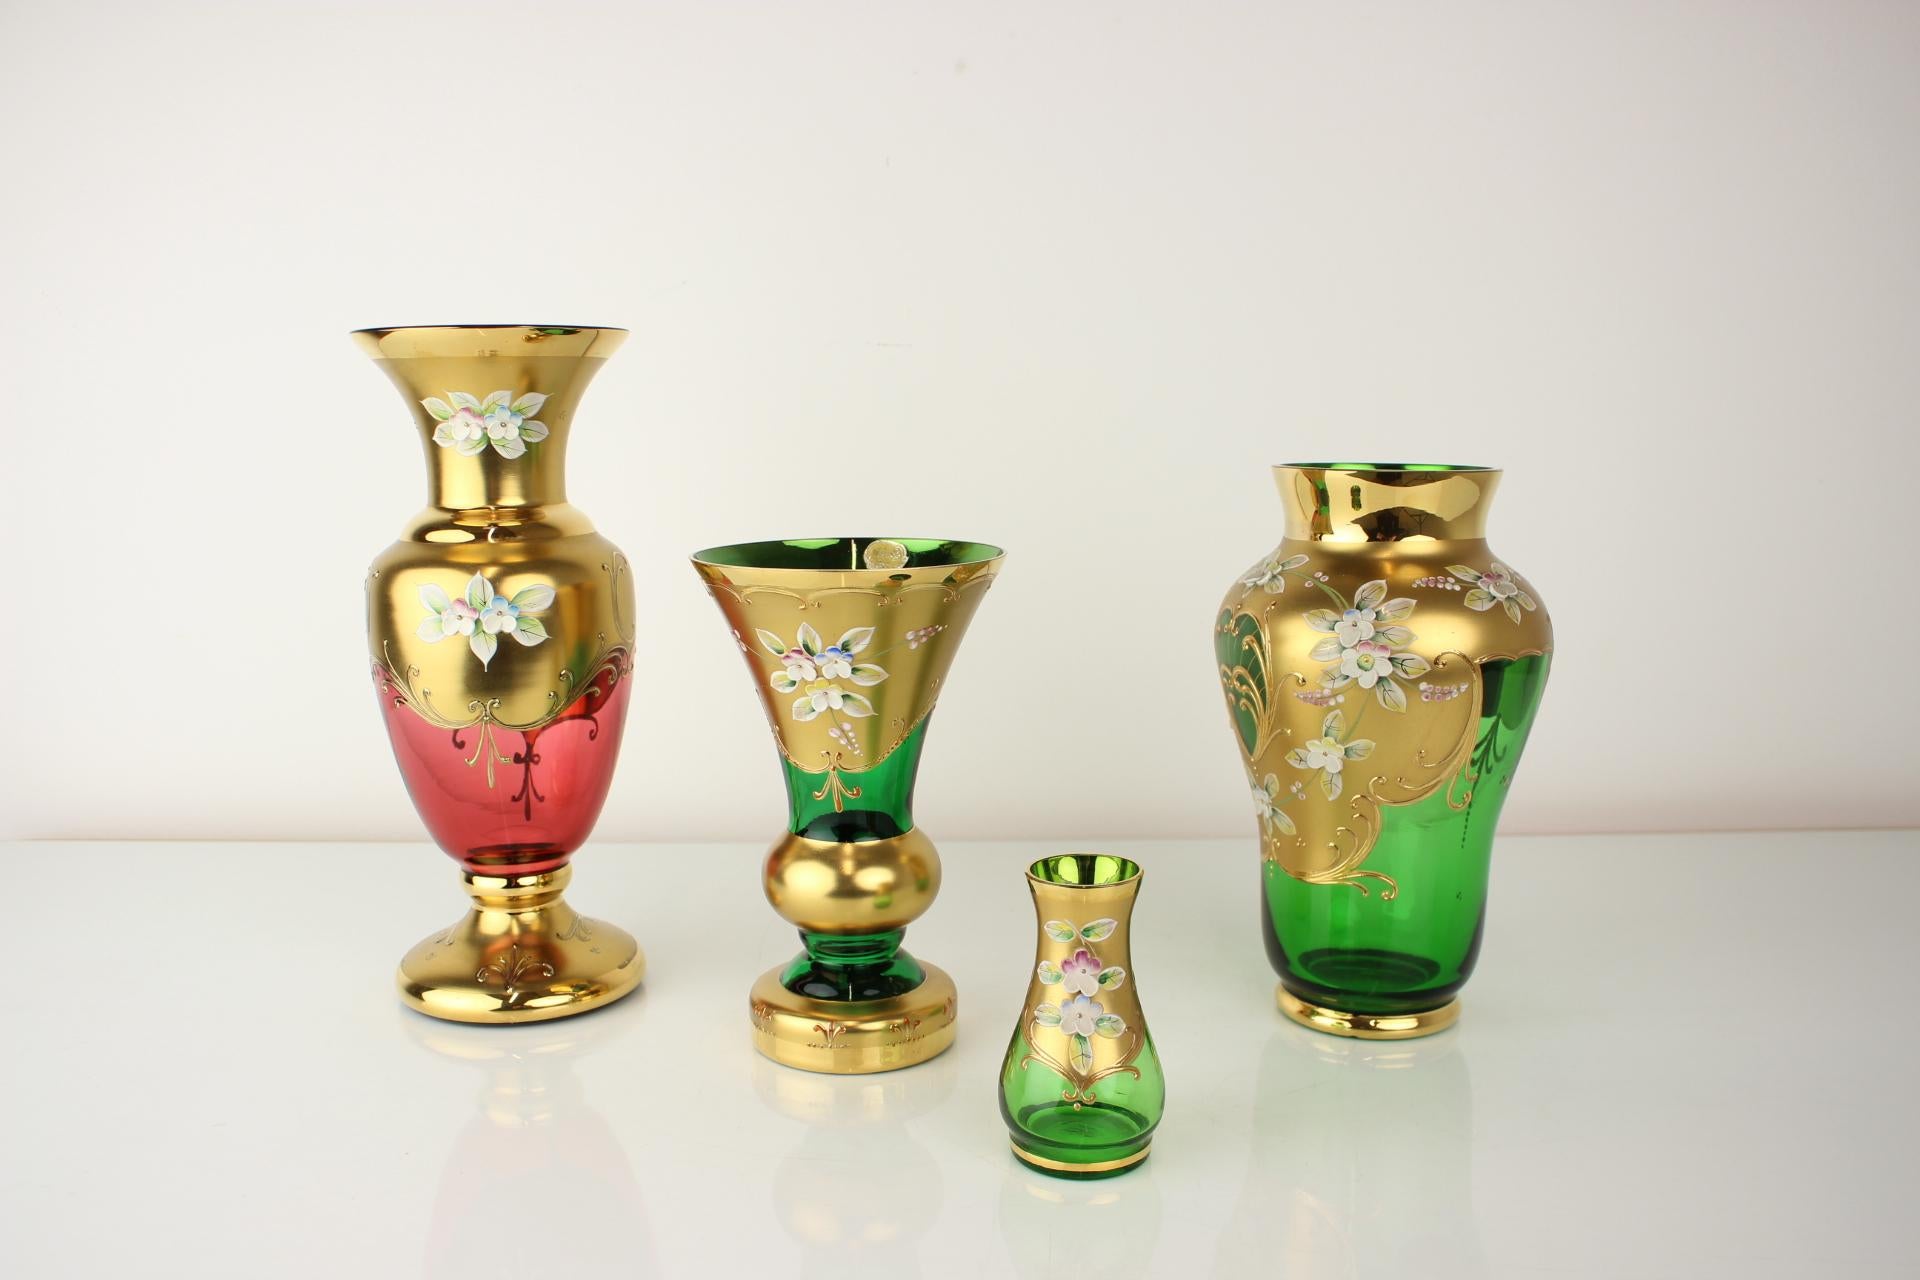 High enamel decoration technology
The time of the origin of this unique technology was at the turn of the 19th and 20th centuries. Pure gold and platinum are used to decorate the glass. It is applied to the glass with a brush in a liquid state and